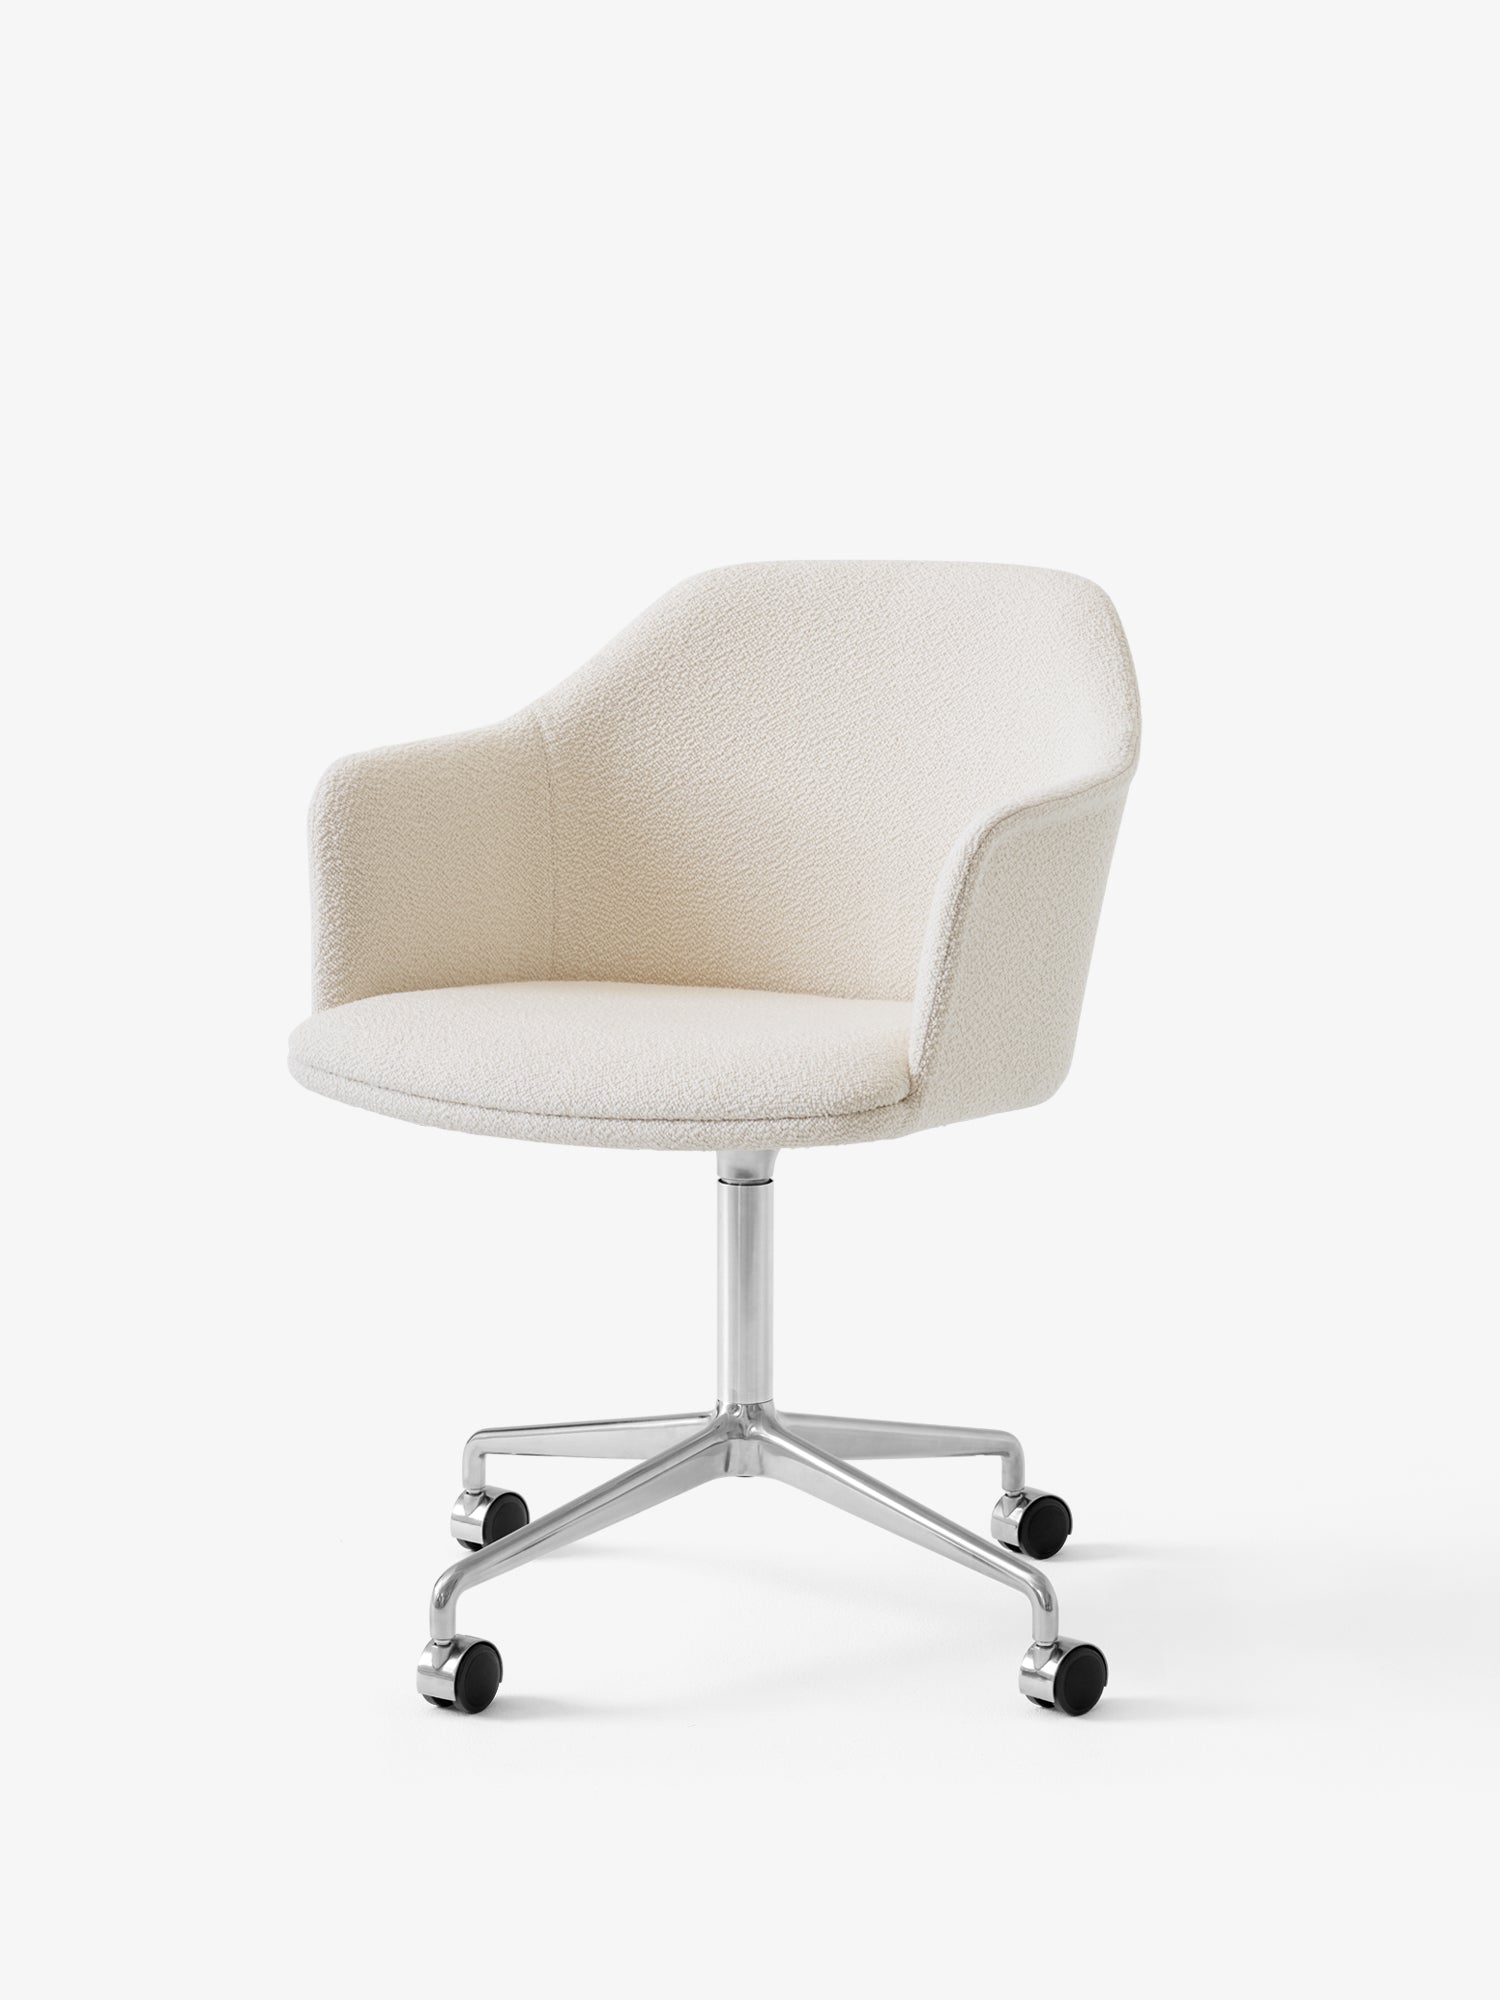 Rely HW51 Armchair with Seat Cushion